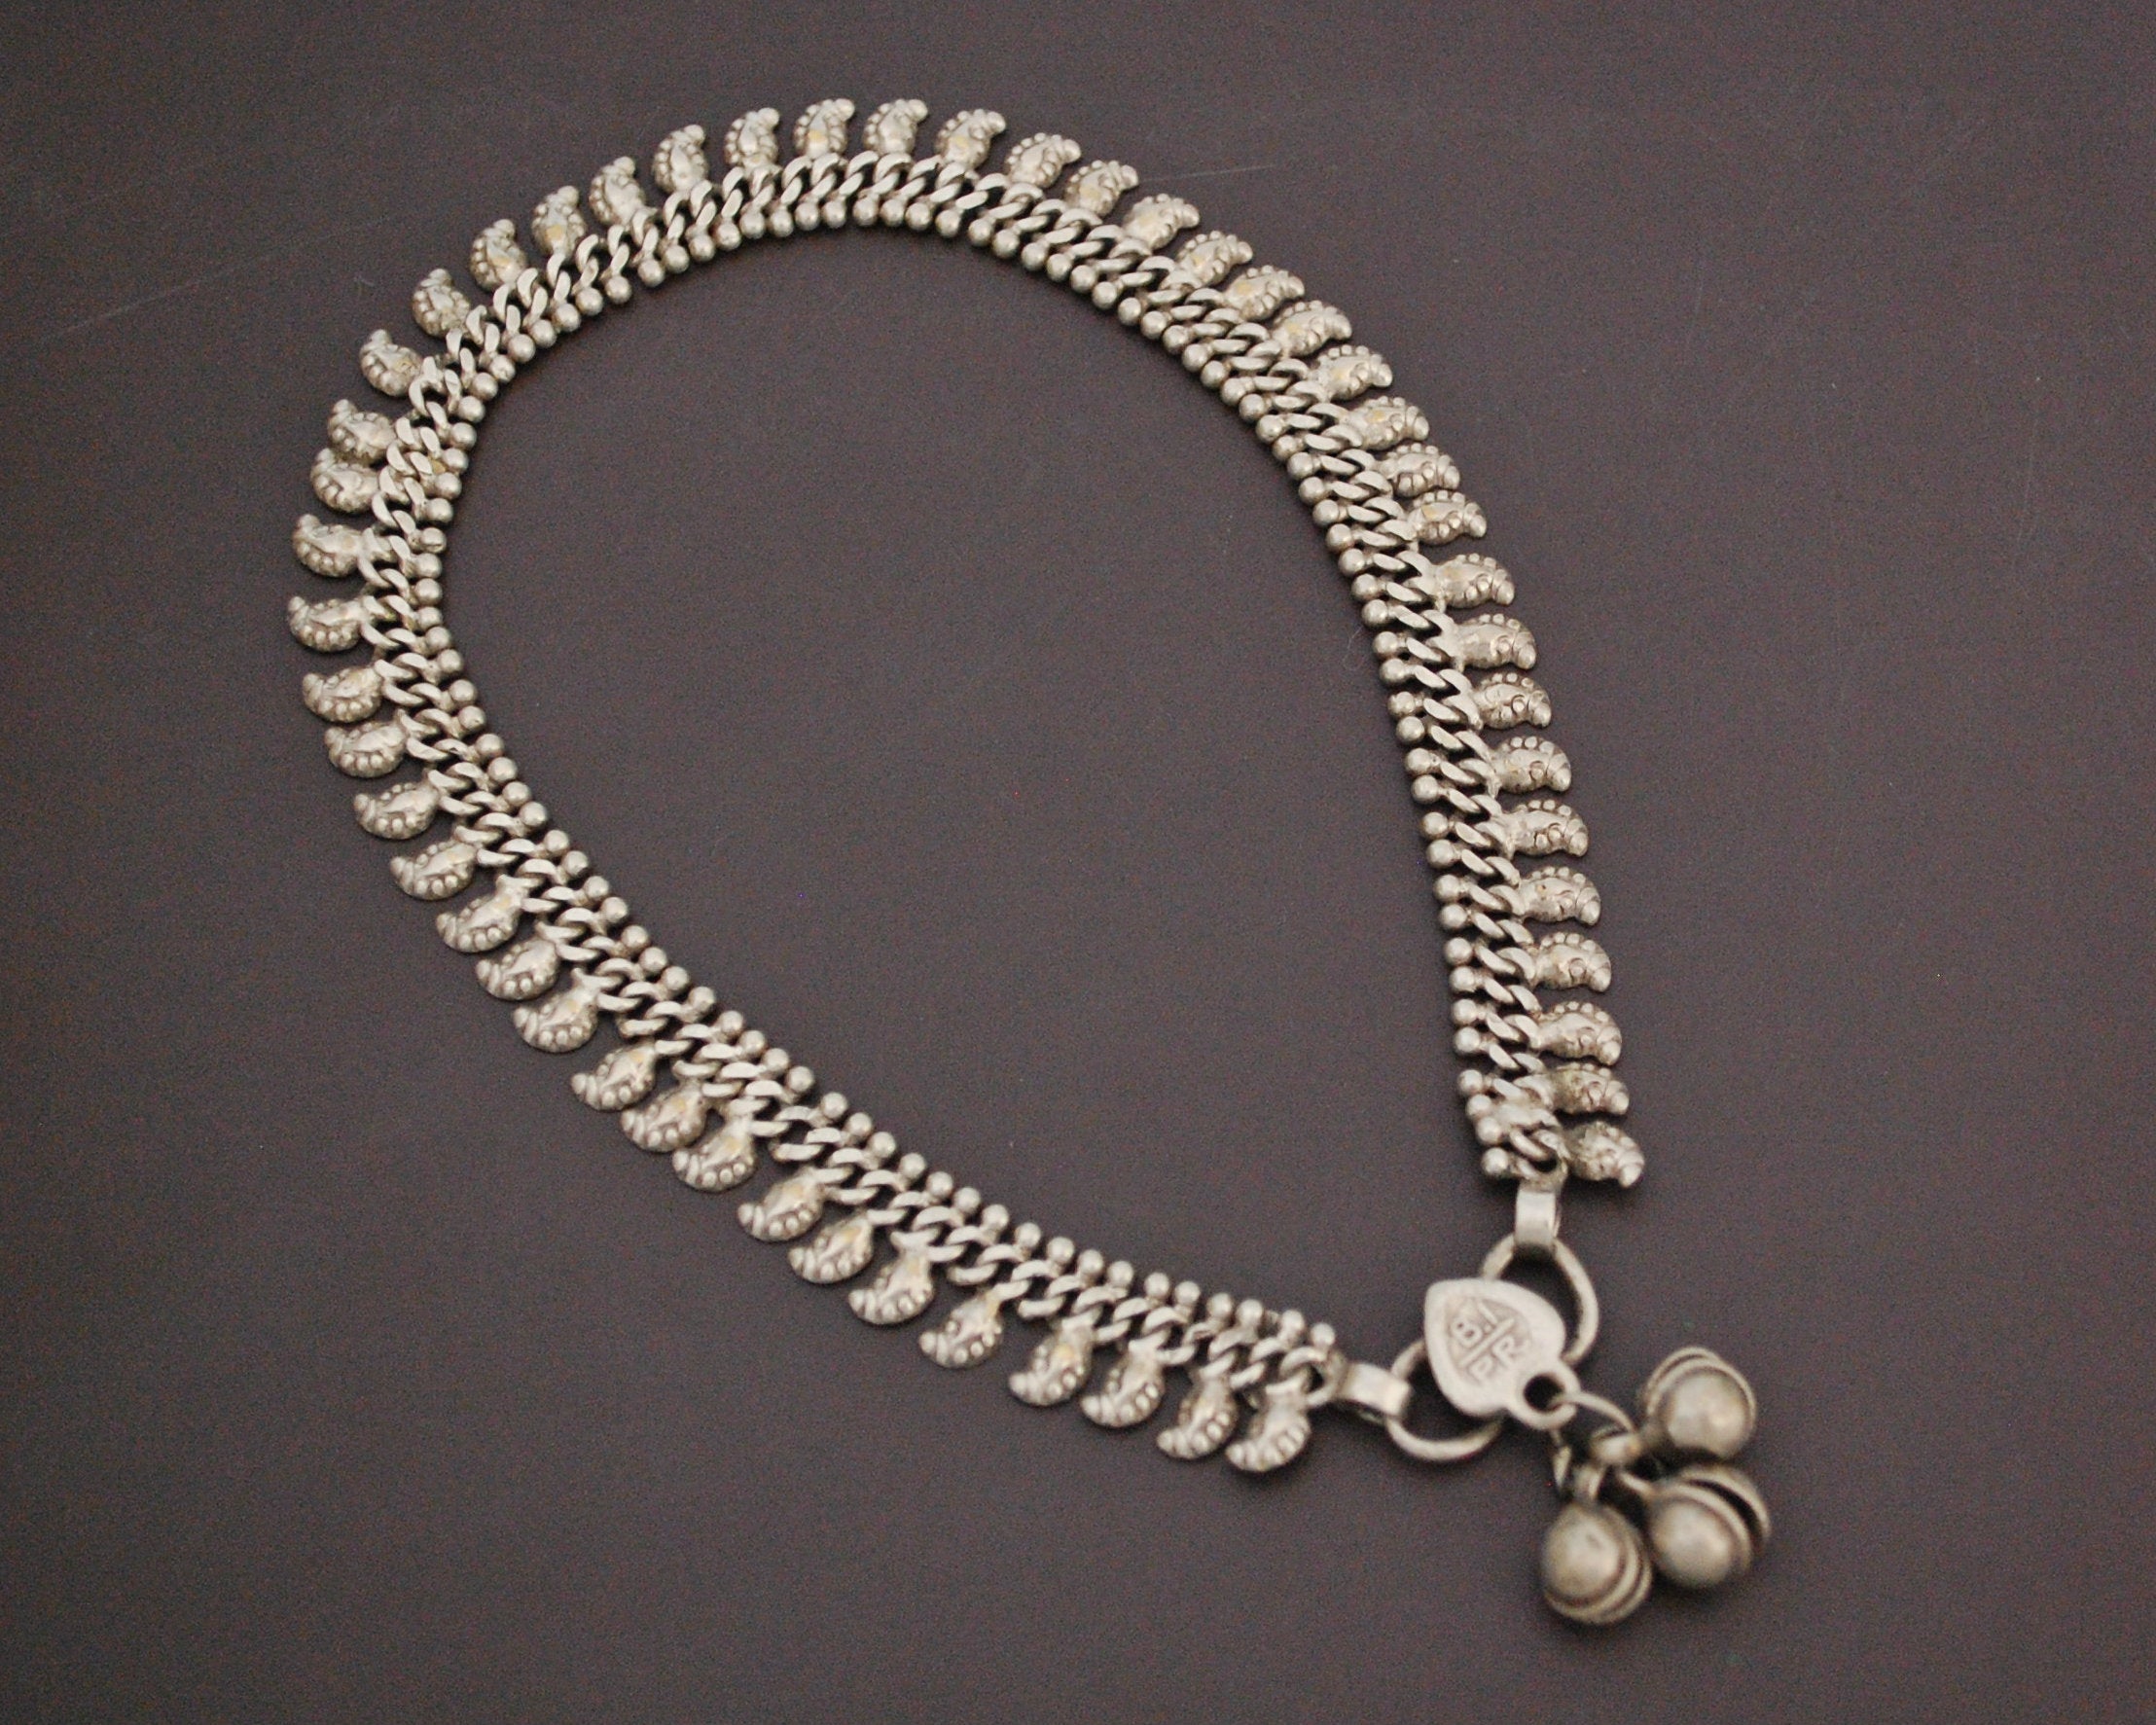 Rajasthani Silver Anklet with Bells